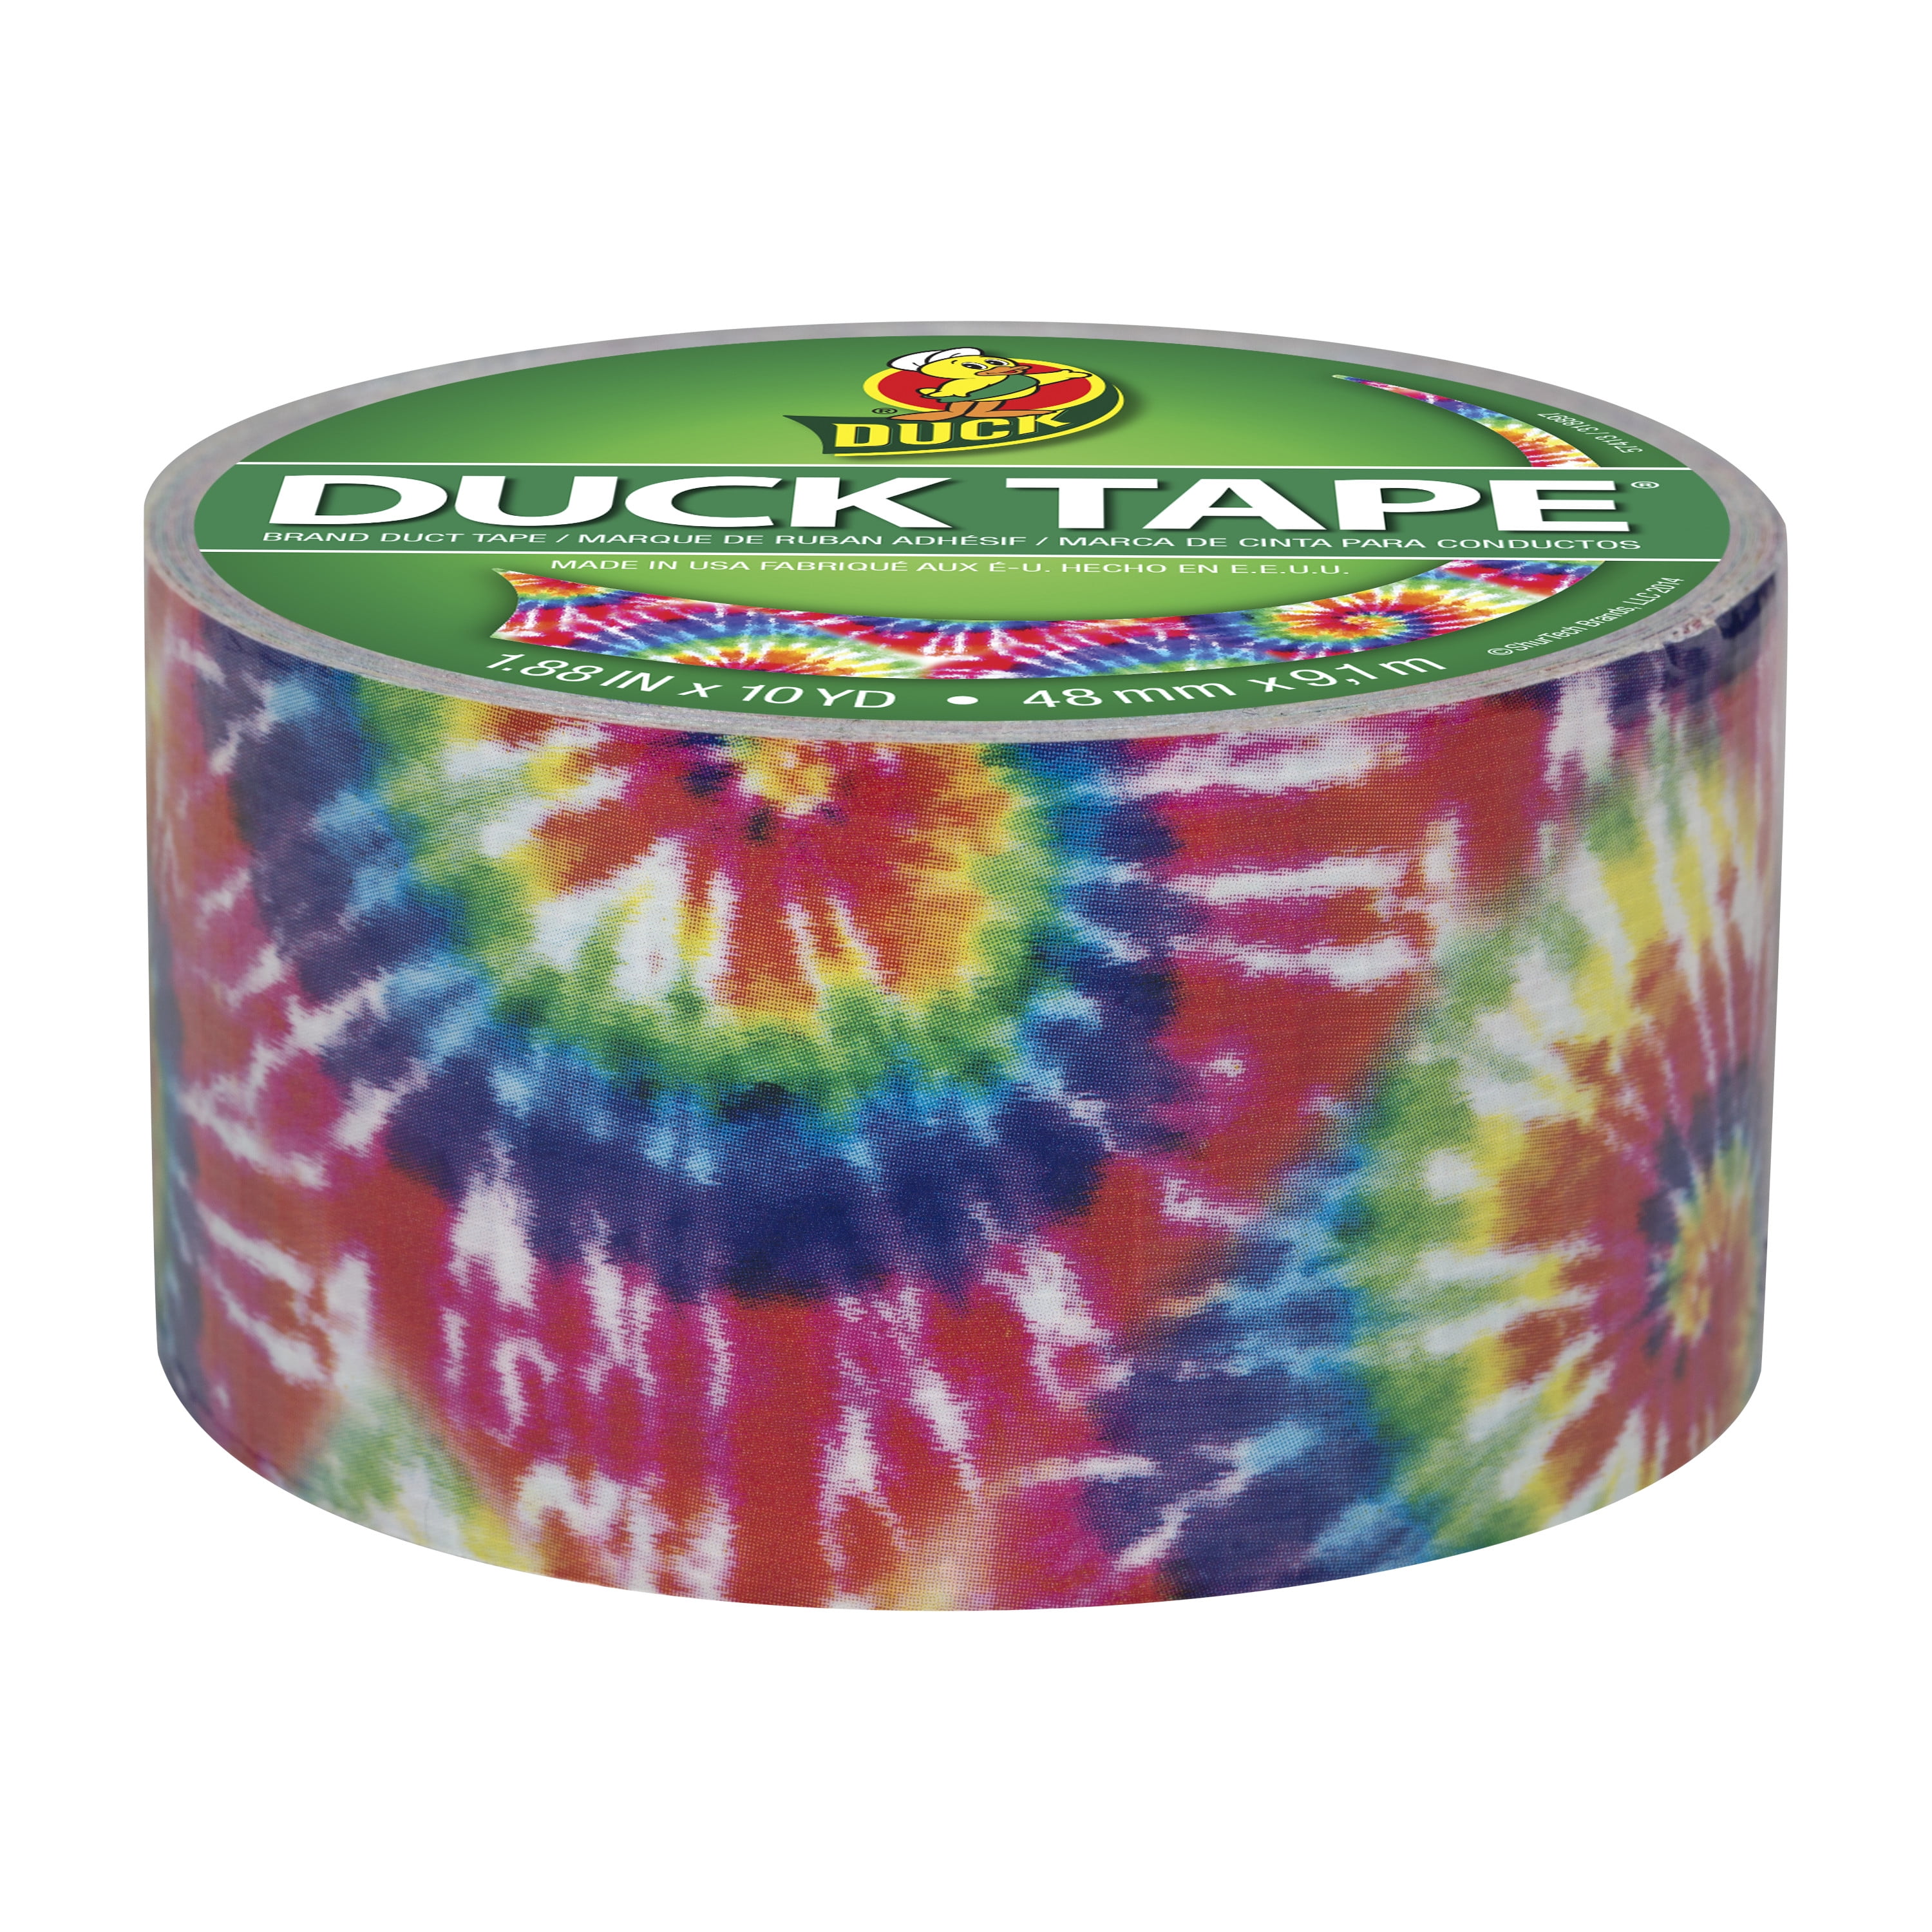 x 10 L yd. Duck 283268 Love Tie Dye Colored Printed Duct Tape 1.88 W in 